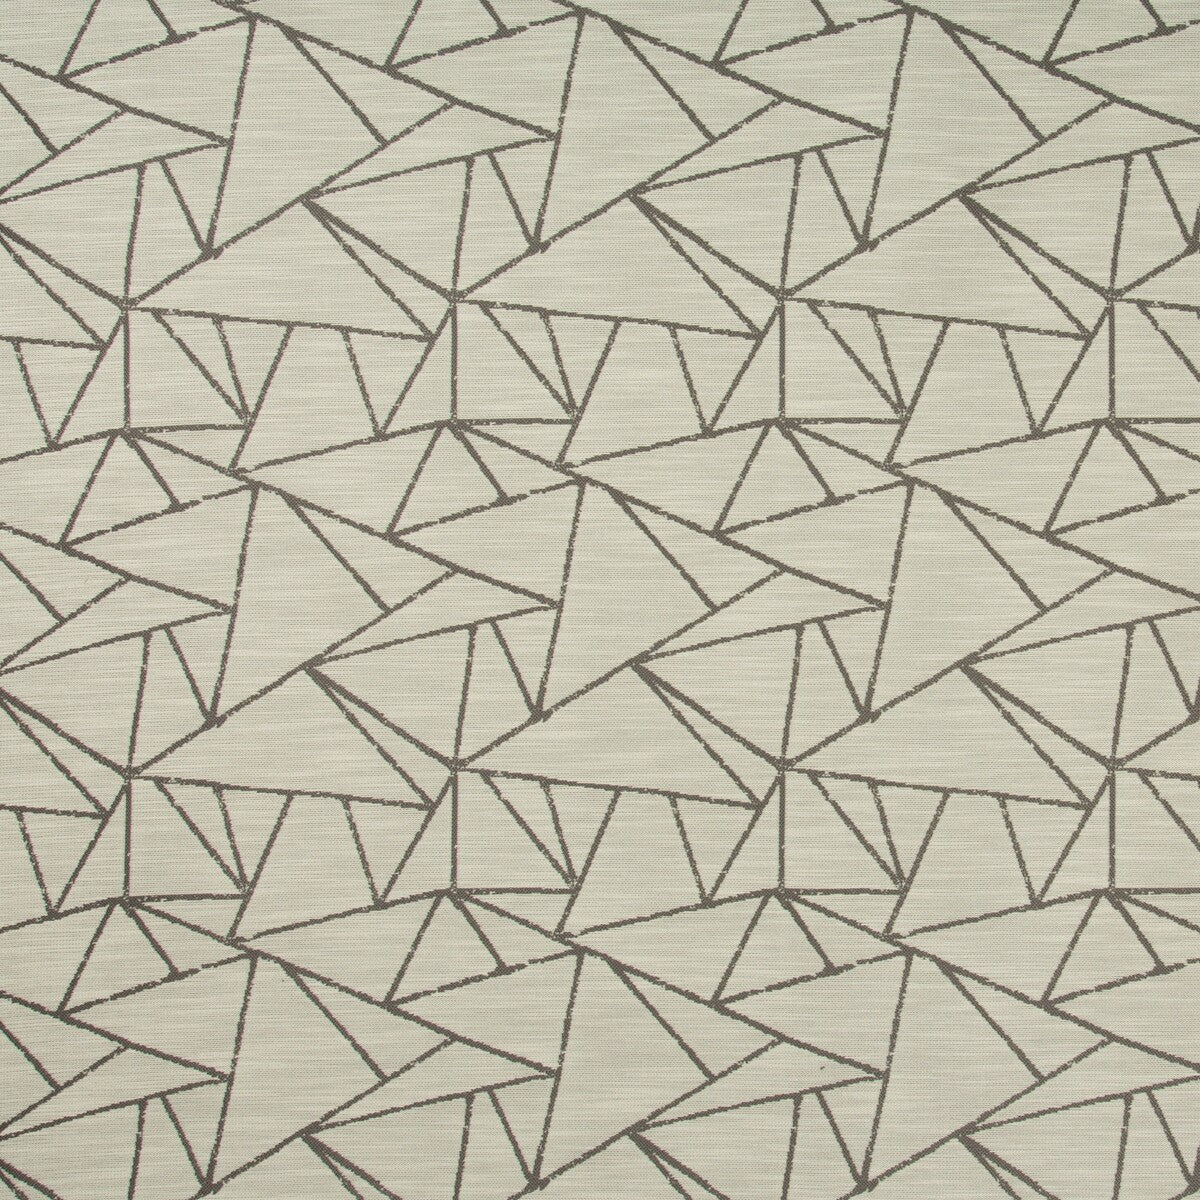 Kravet Design fabric in 35001-21 color - pattern 35001.21.0 - by Kravet Design in the Performance Crypton Home collection